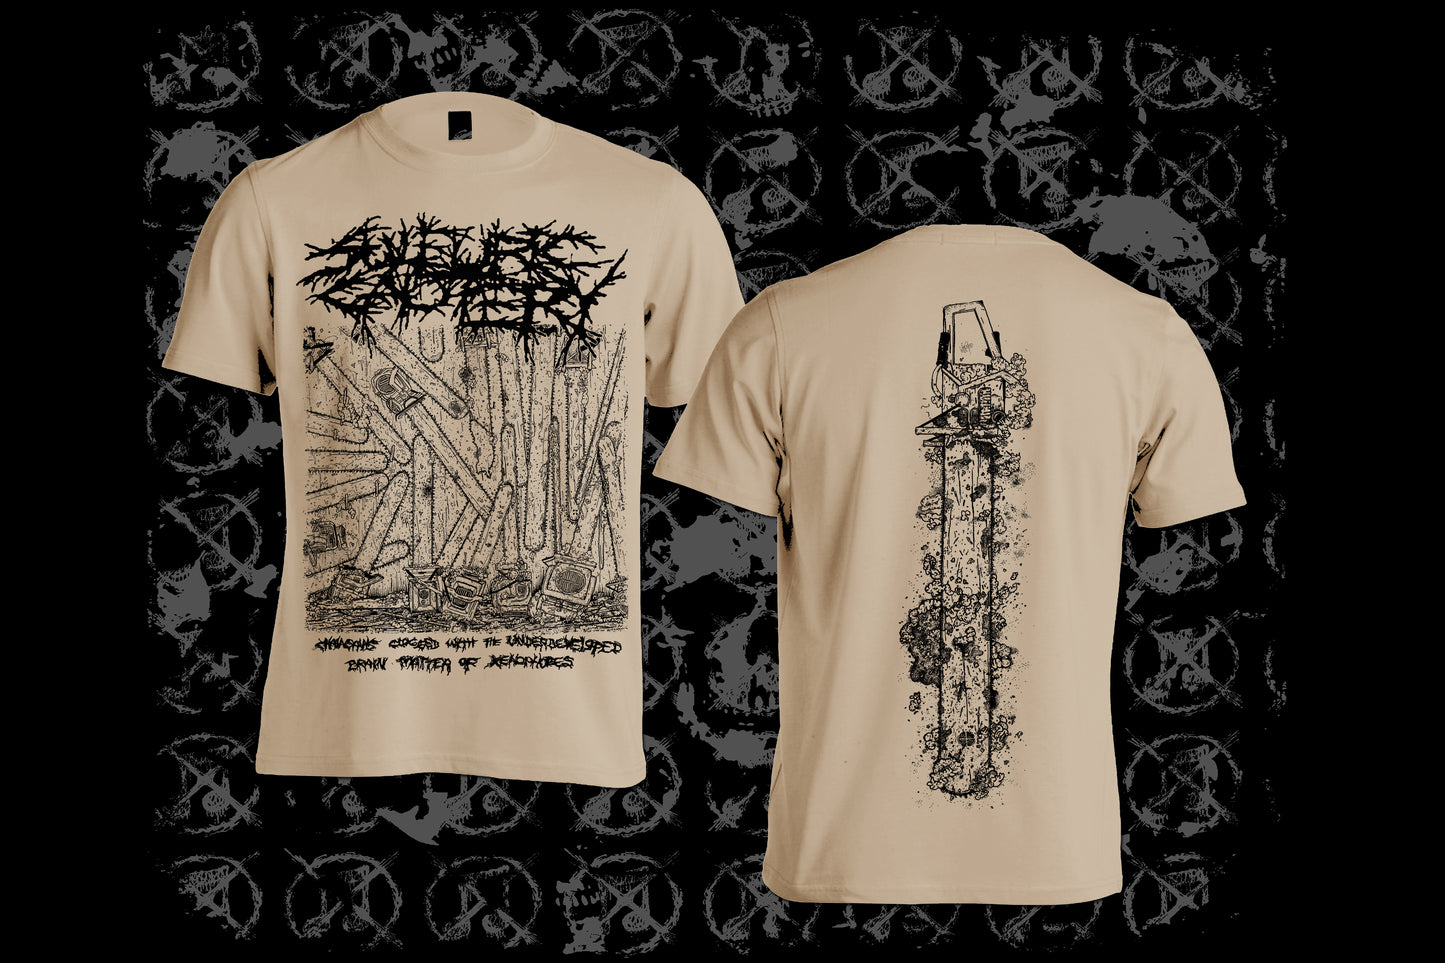 SULFURIC CAUTERY - Chainsaws Clogged With The Underdeveloped Brain Matter Of Xenophobes T-shirt